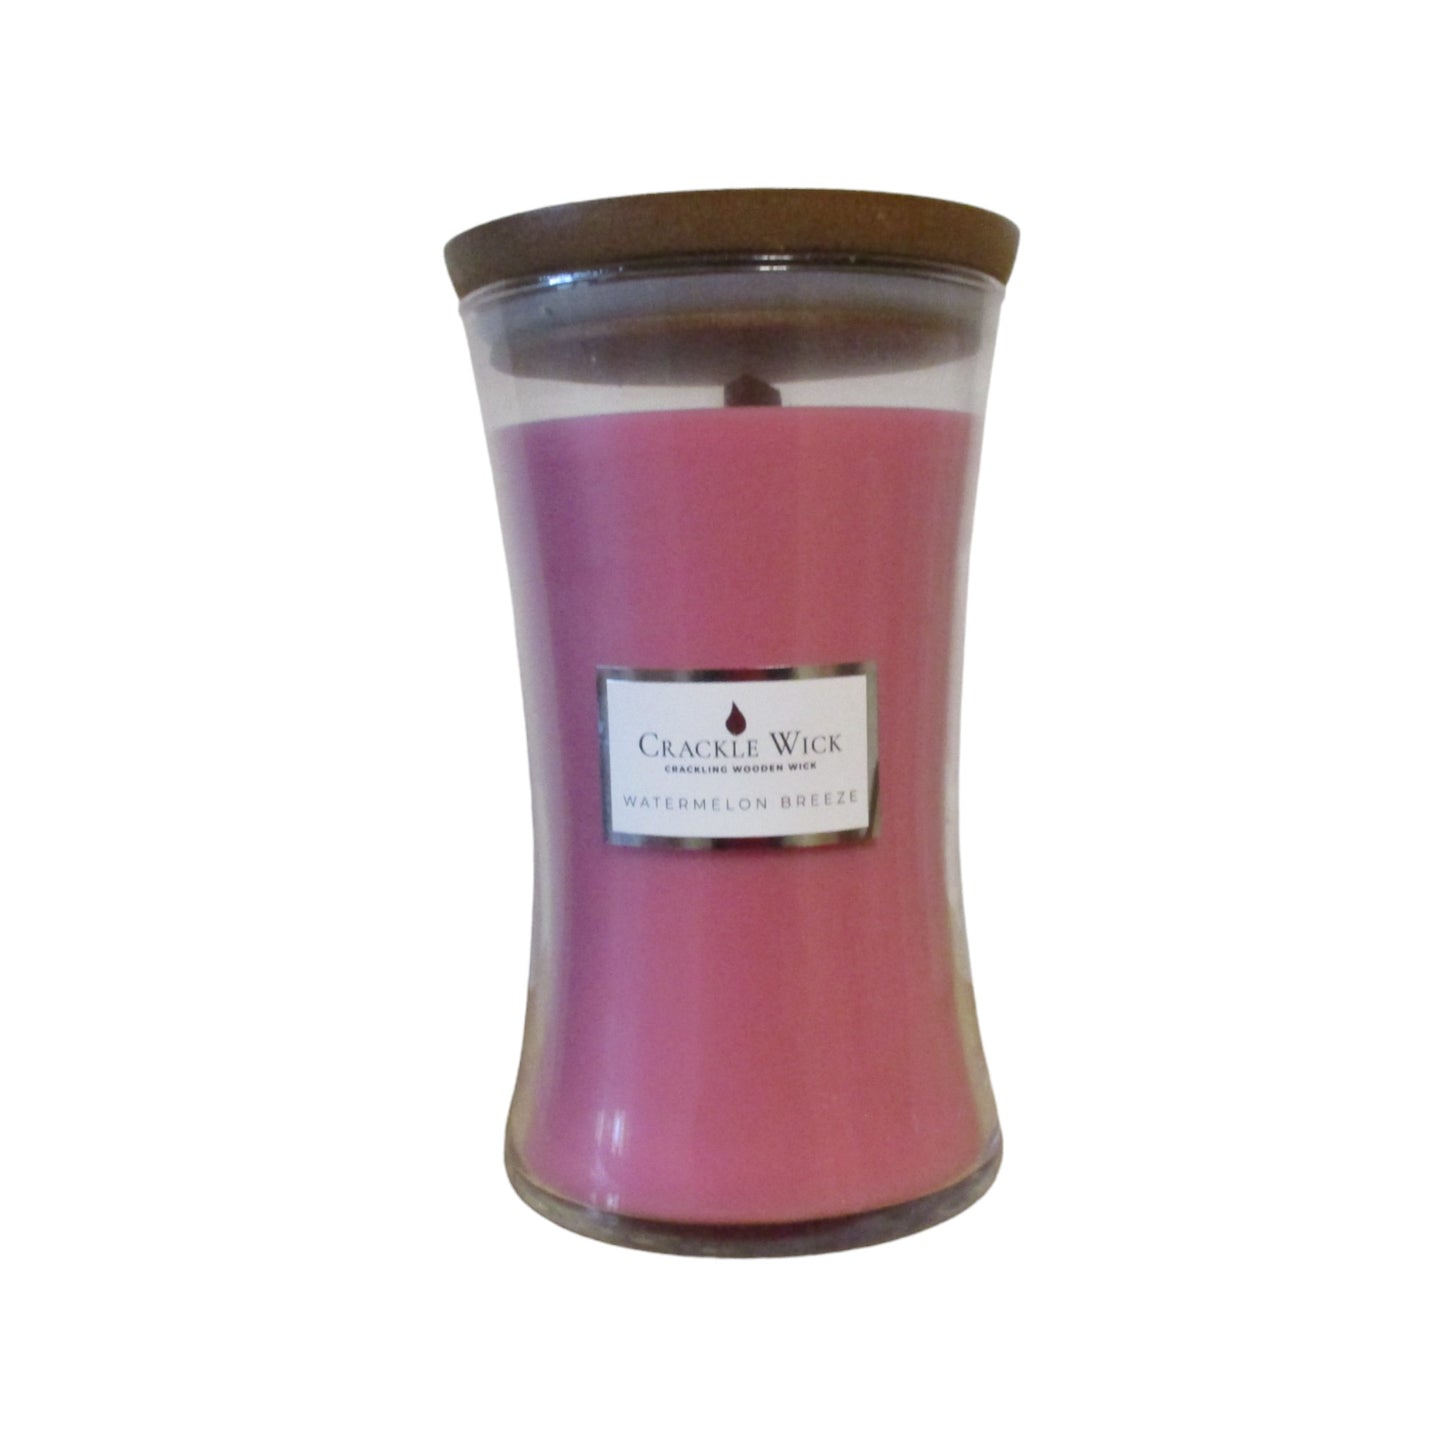 Crackle Wick - Watermelon Breeze - Single Wick Candle Tall Hourglass 606g